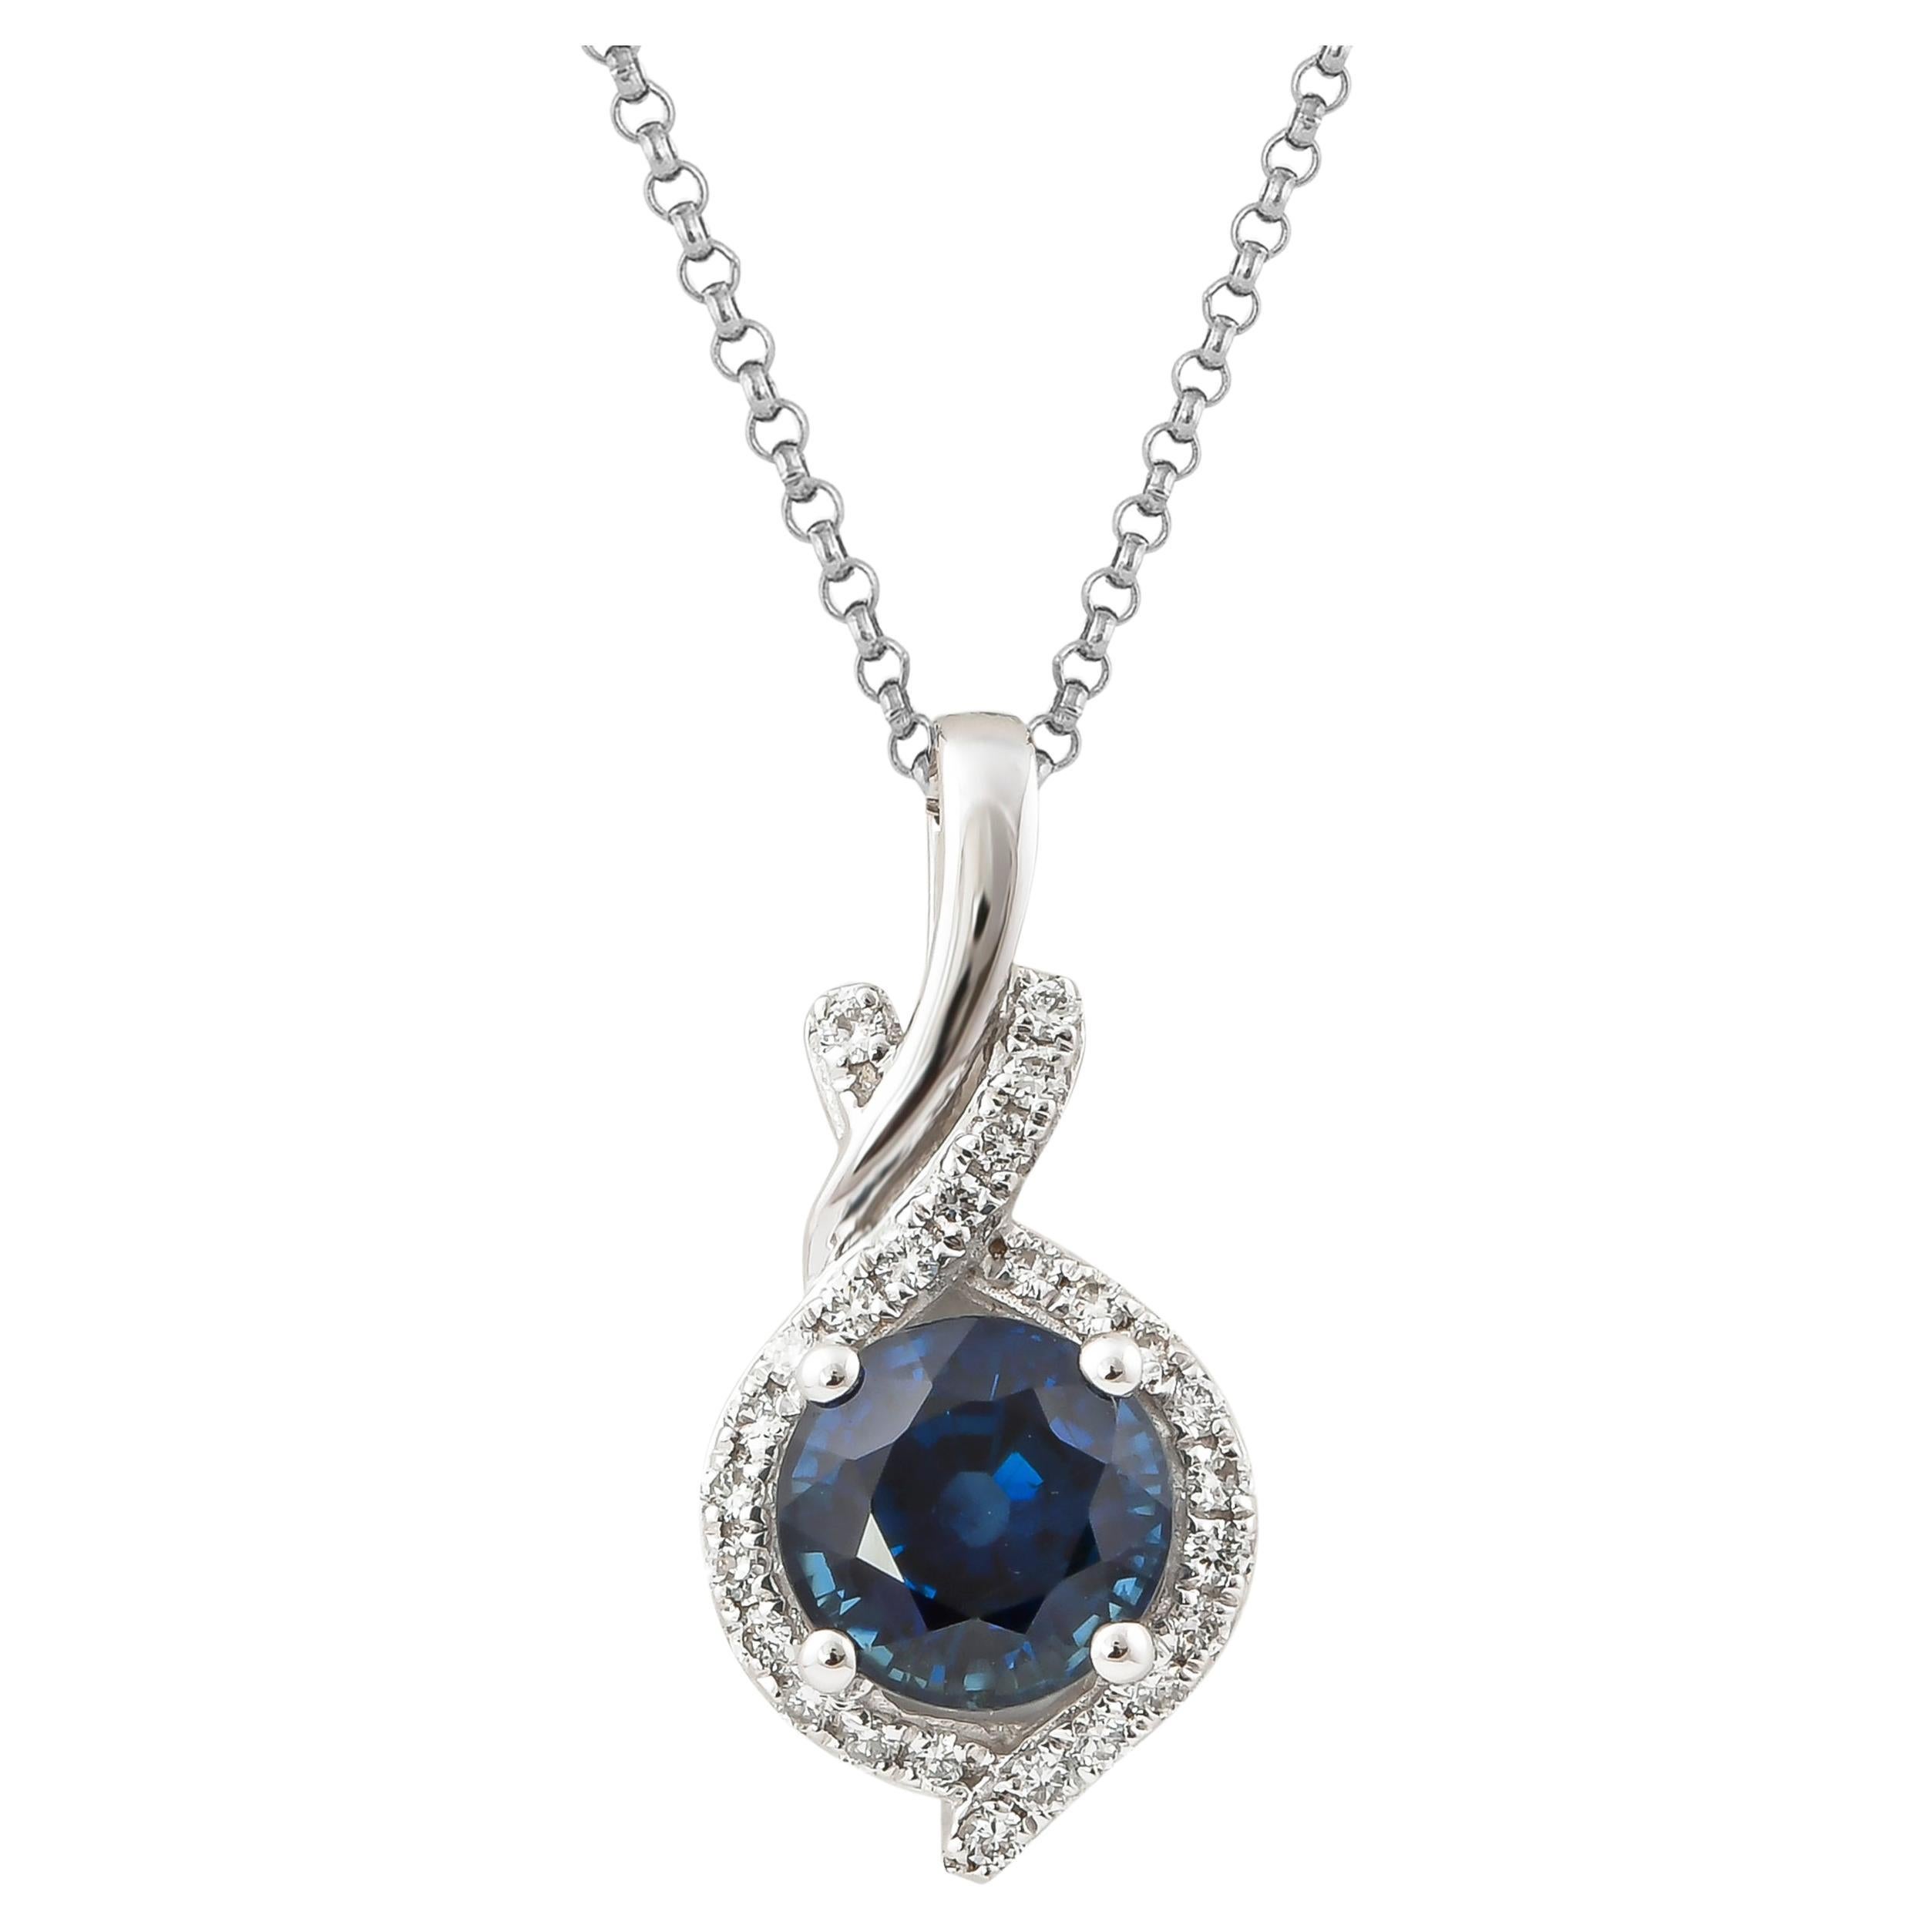 1.1 Carat Blue Sapphire and Diamond Pendant with Chain in 18 Karat White Gold